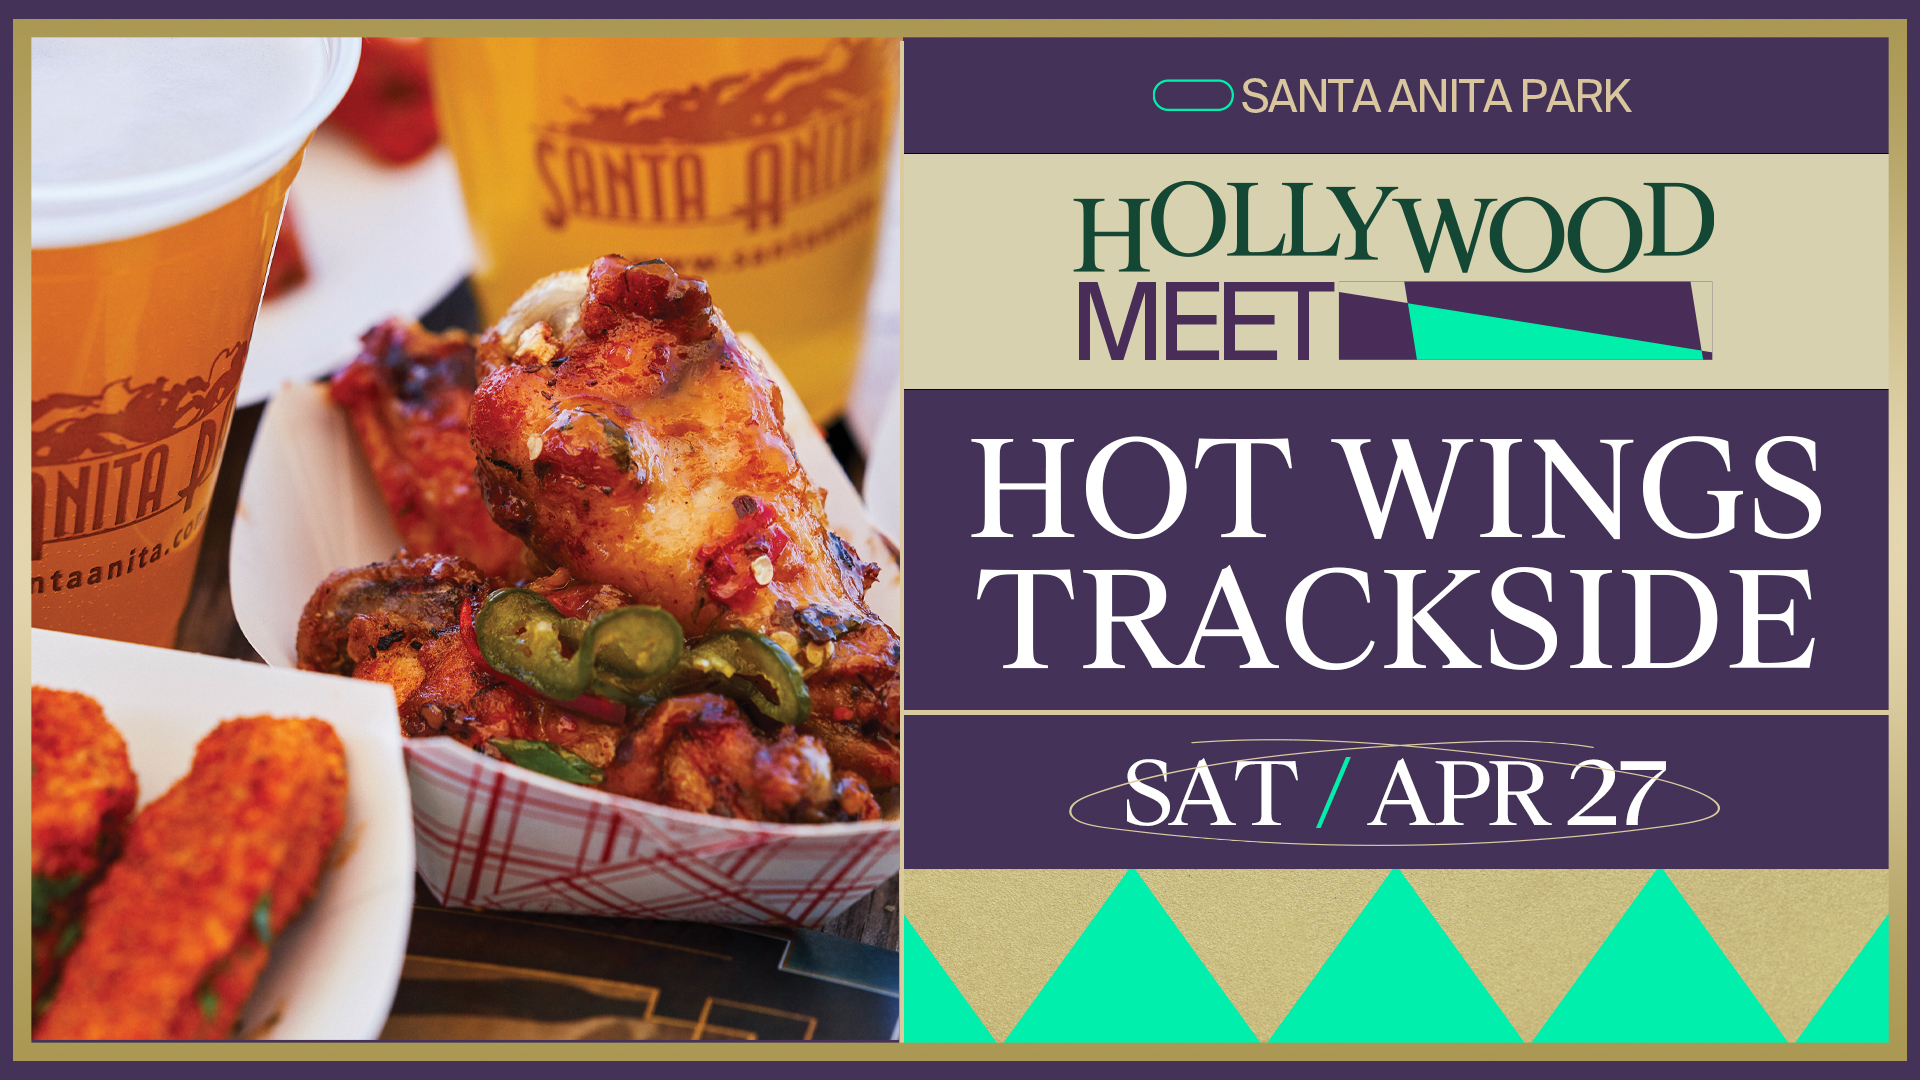 JOIN US FOR HOT WINGS TRACKSIDE ON SAT, APR 27TH!